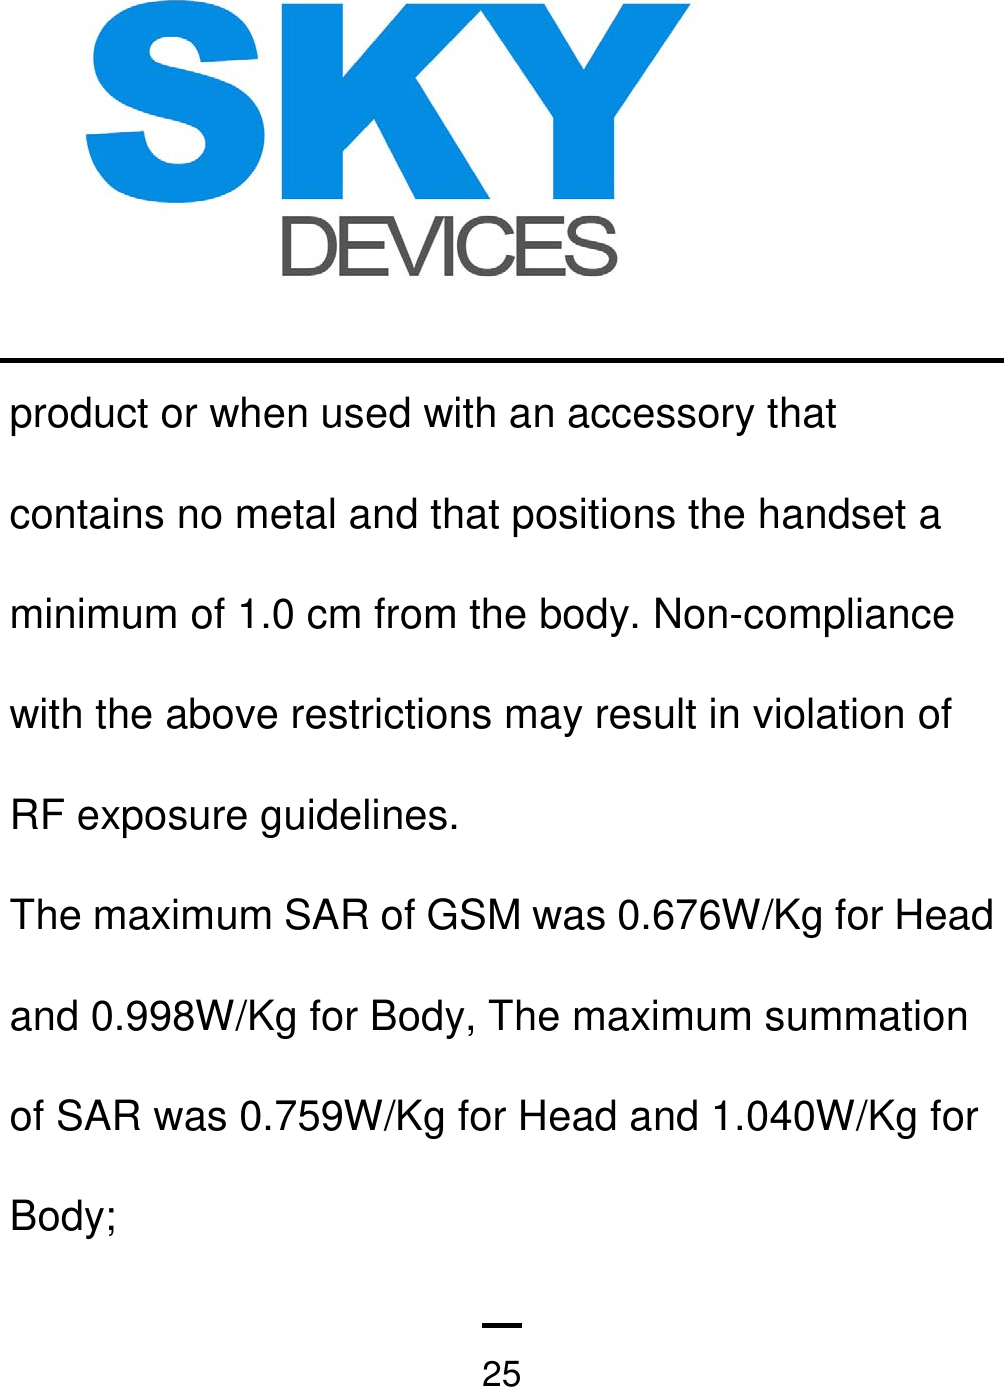   25product or when used with an accessory that contains no metal and that positions the handset a minimum of 1.0 cm from the body. Non-compliance with the above restrictions may result in violation of RF exposure guidelines. The maximum SAR of GSM was 0.676W/Kg for Head and 0.998W/Kg for Body, The maximum summation of SAR was 0.759W/Kg for Head and 1.040W/Kg for Body; 